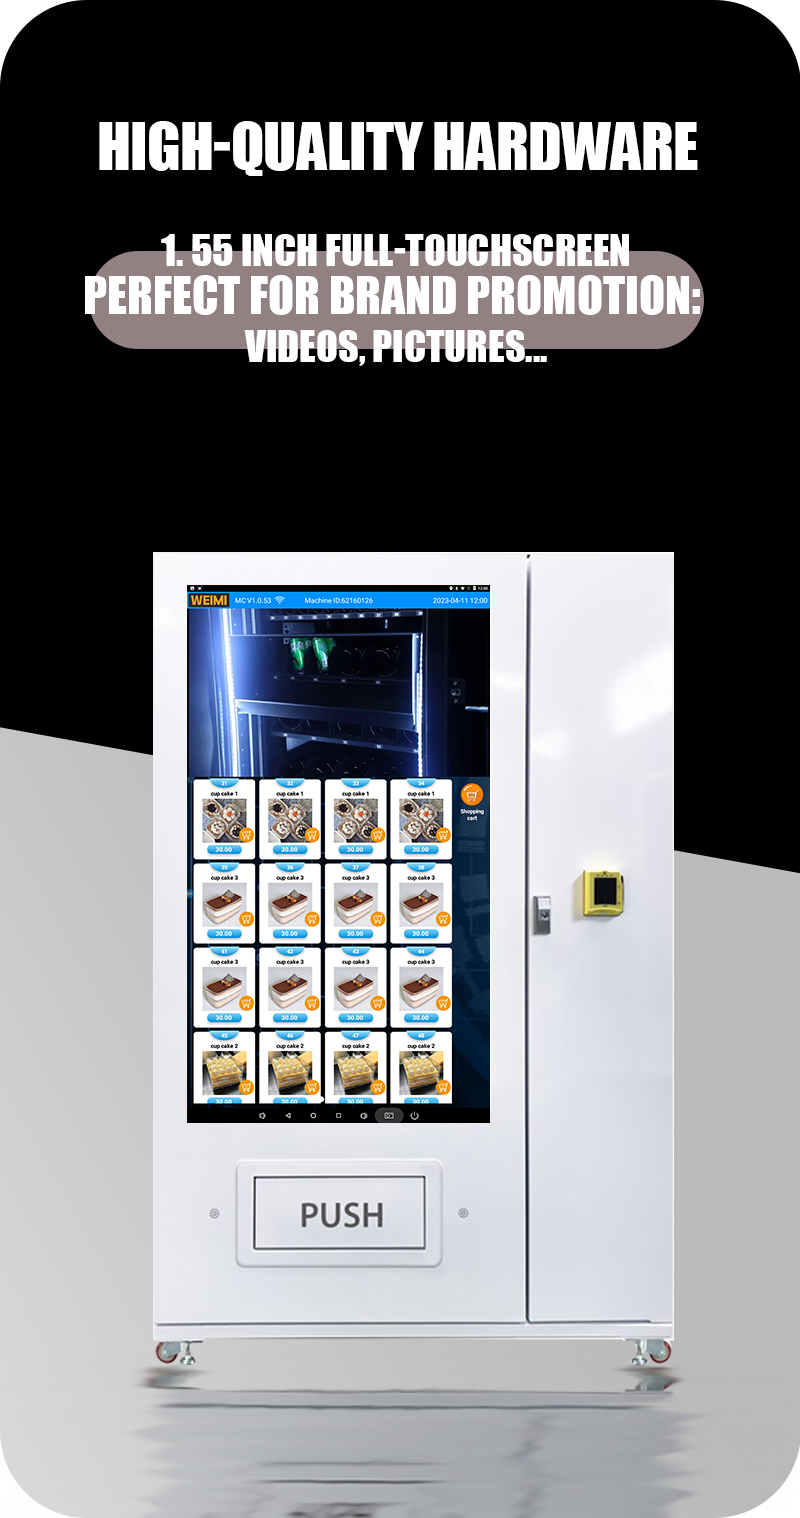 Micron 55 inch ads vending machine supports displaying ads and checking product's detail on the screen